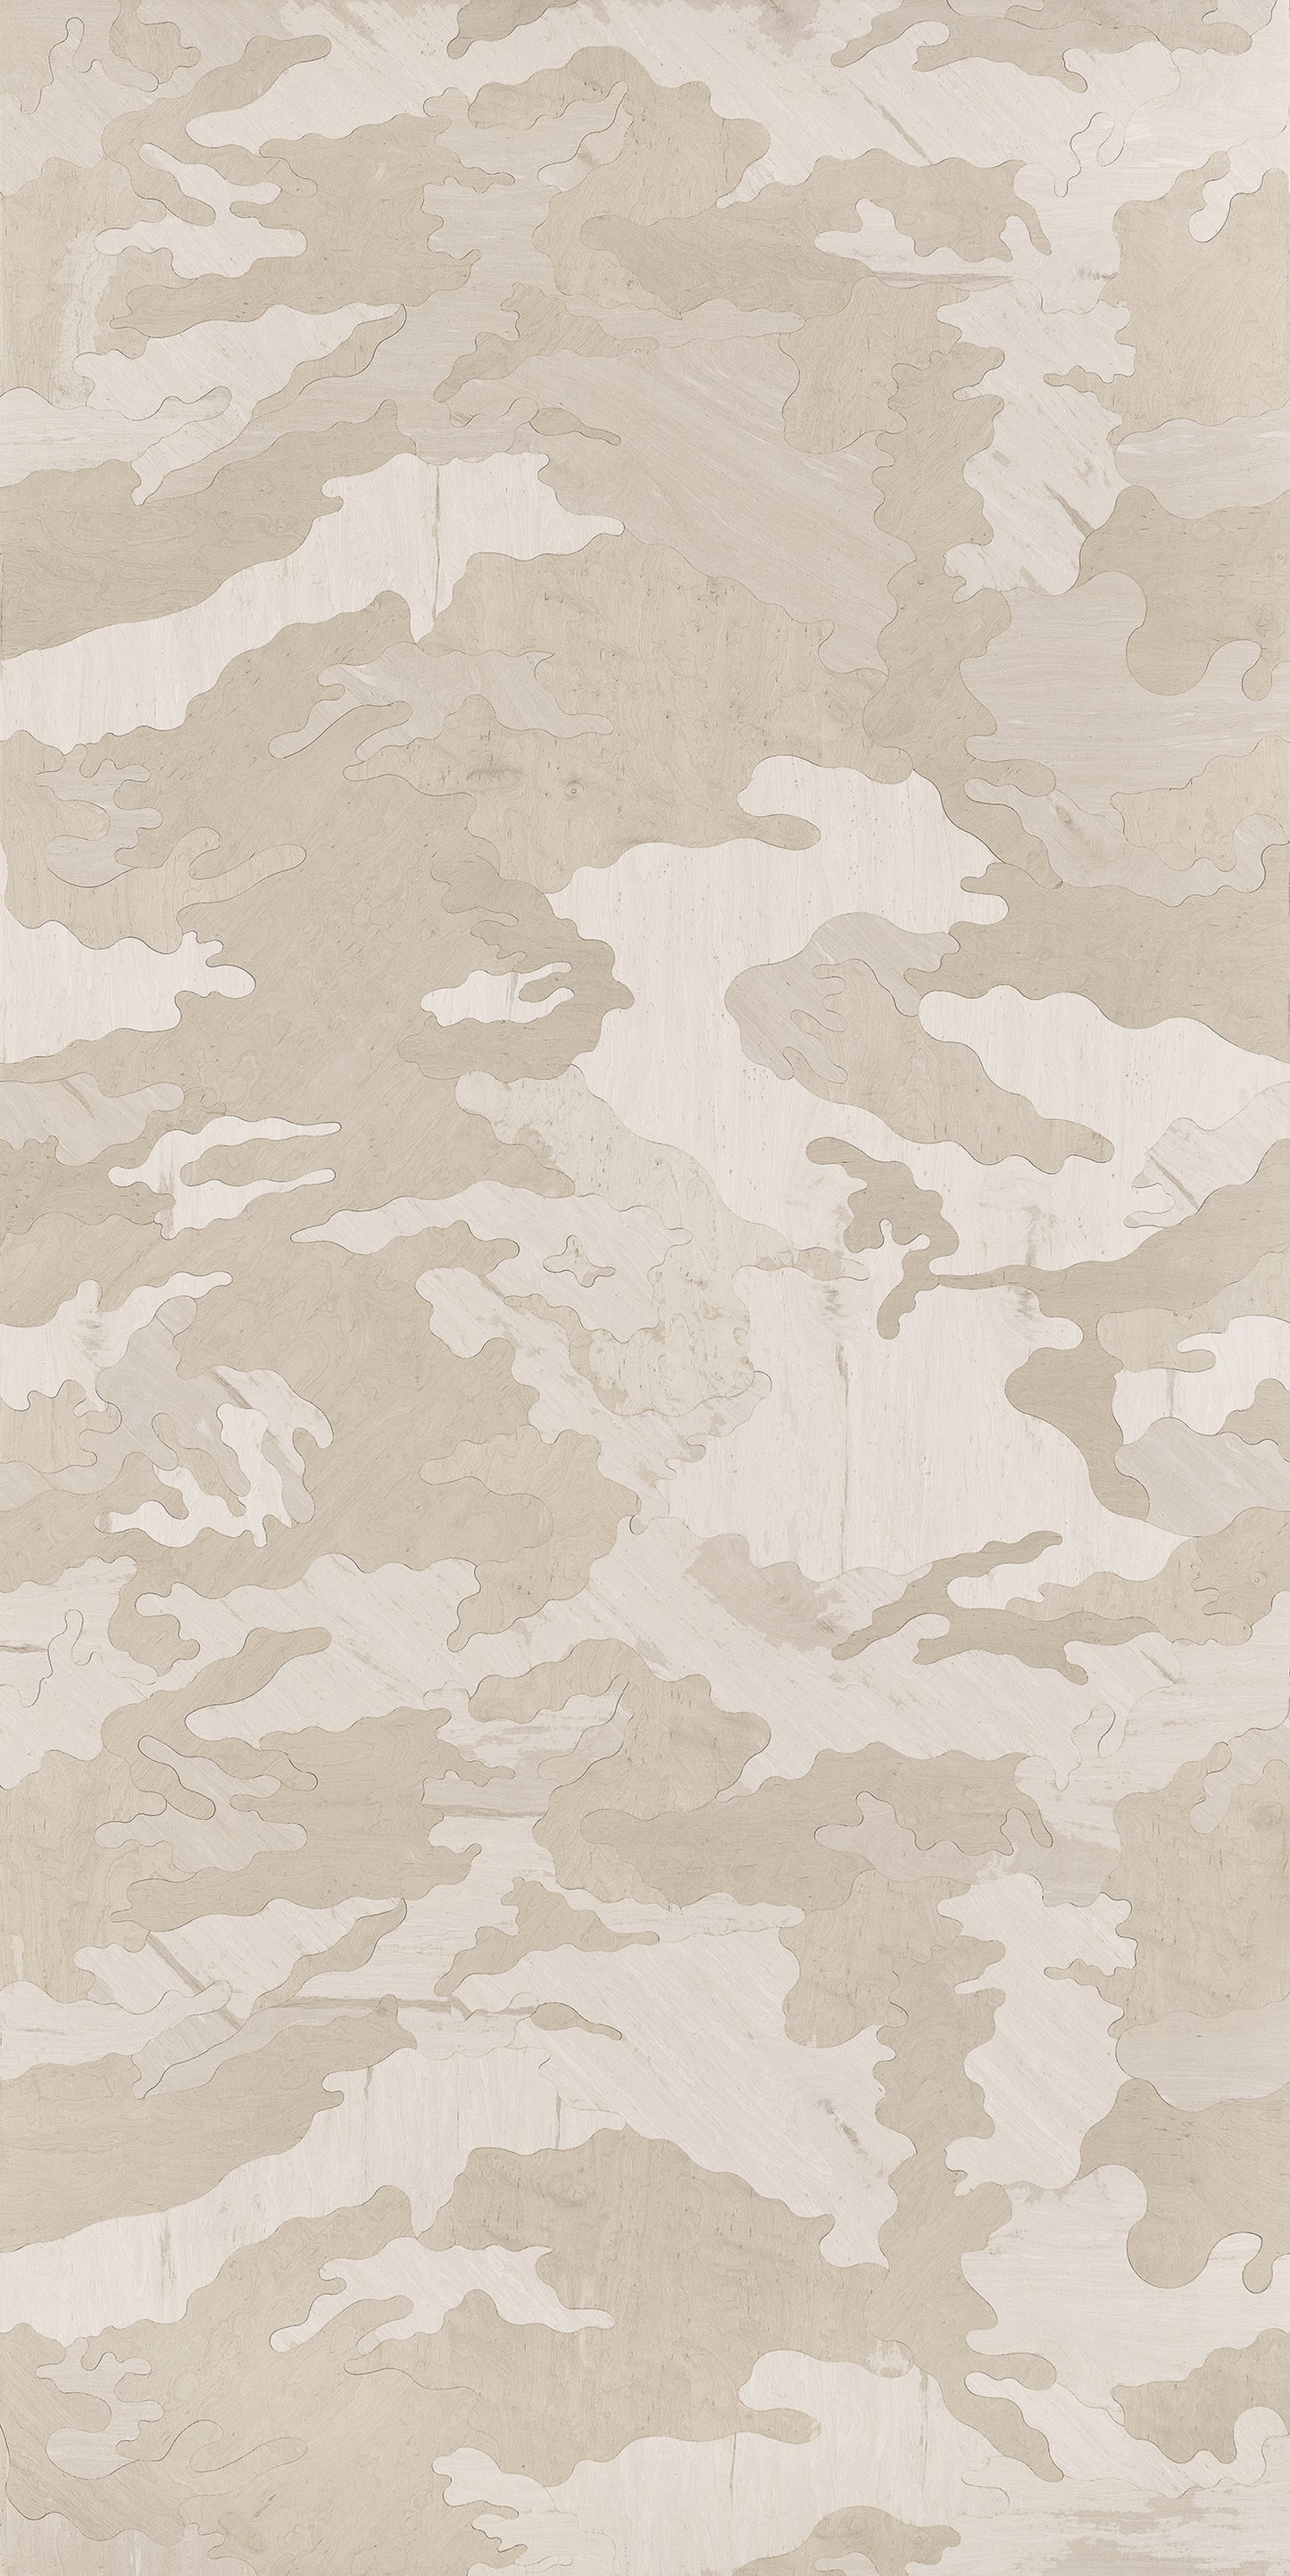 GR.008 (Camouflage), Figured Sycamore